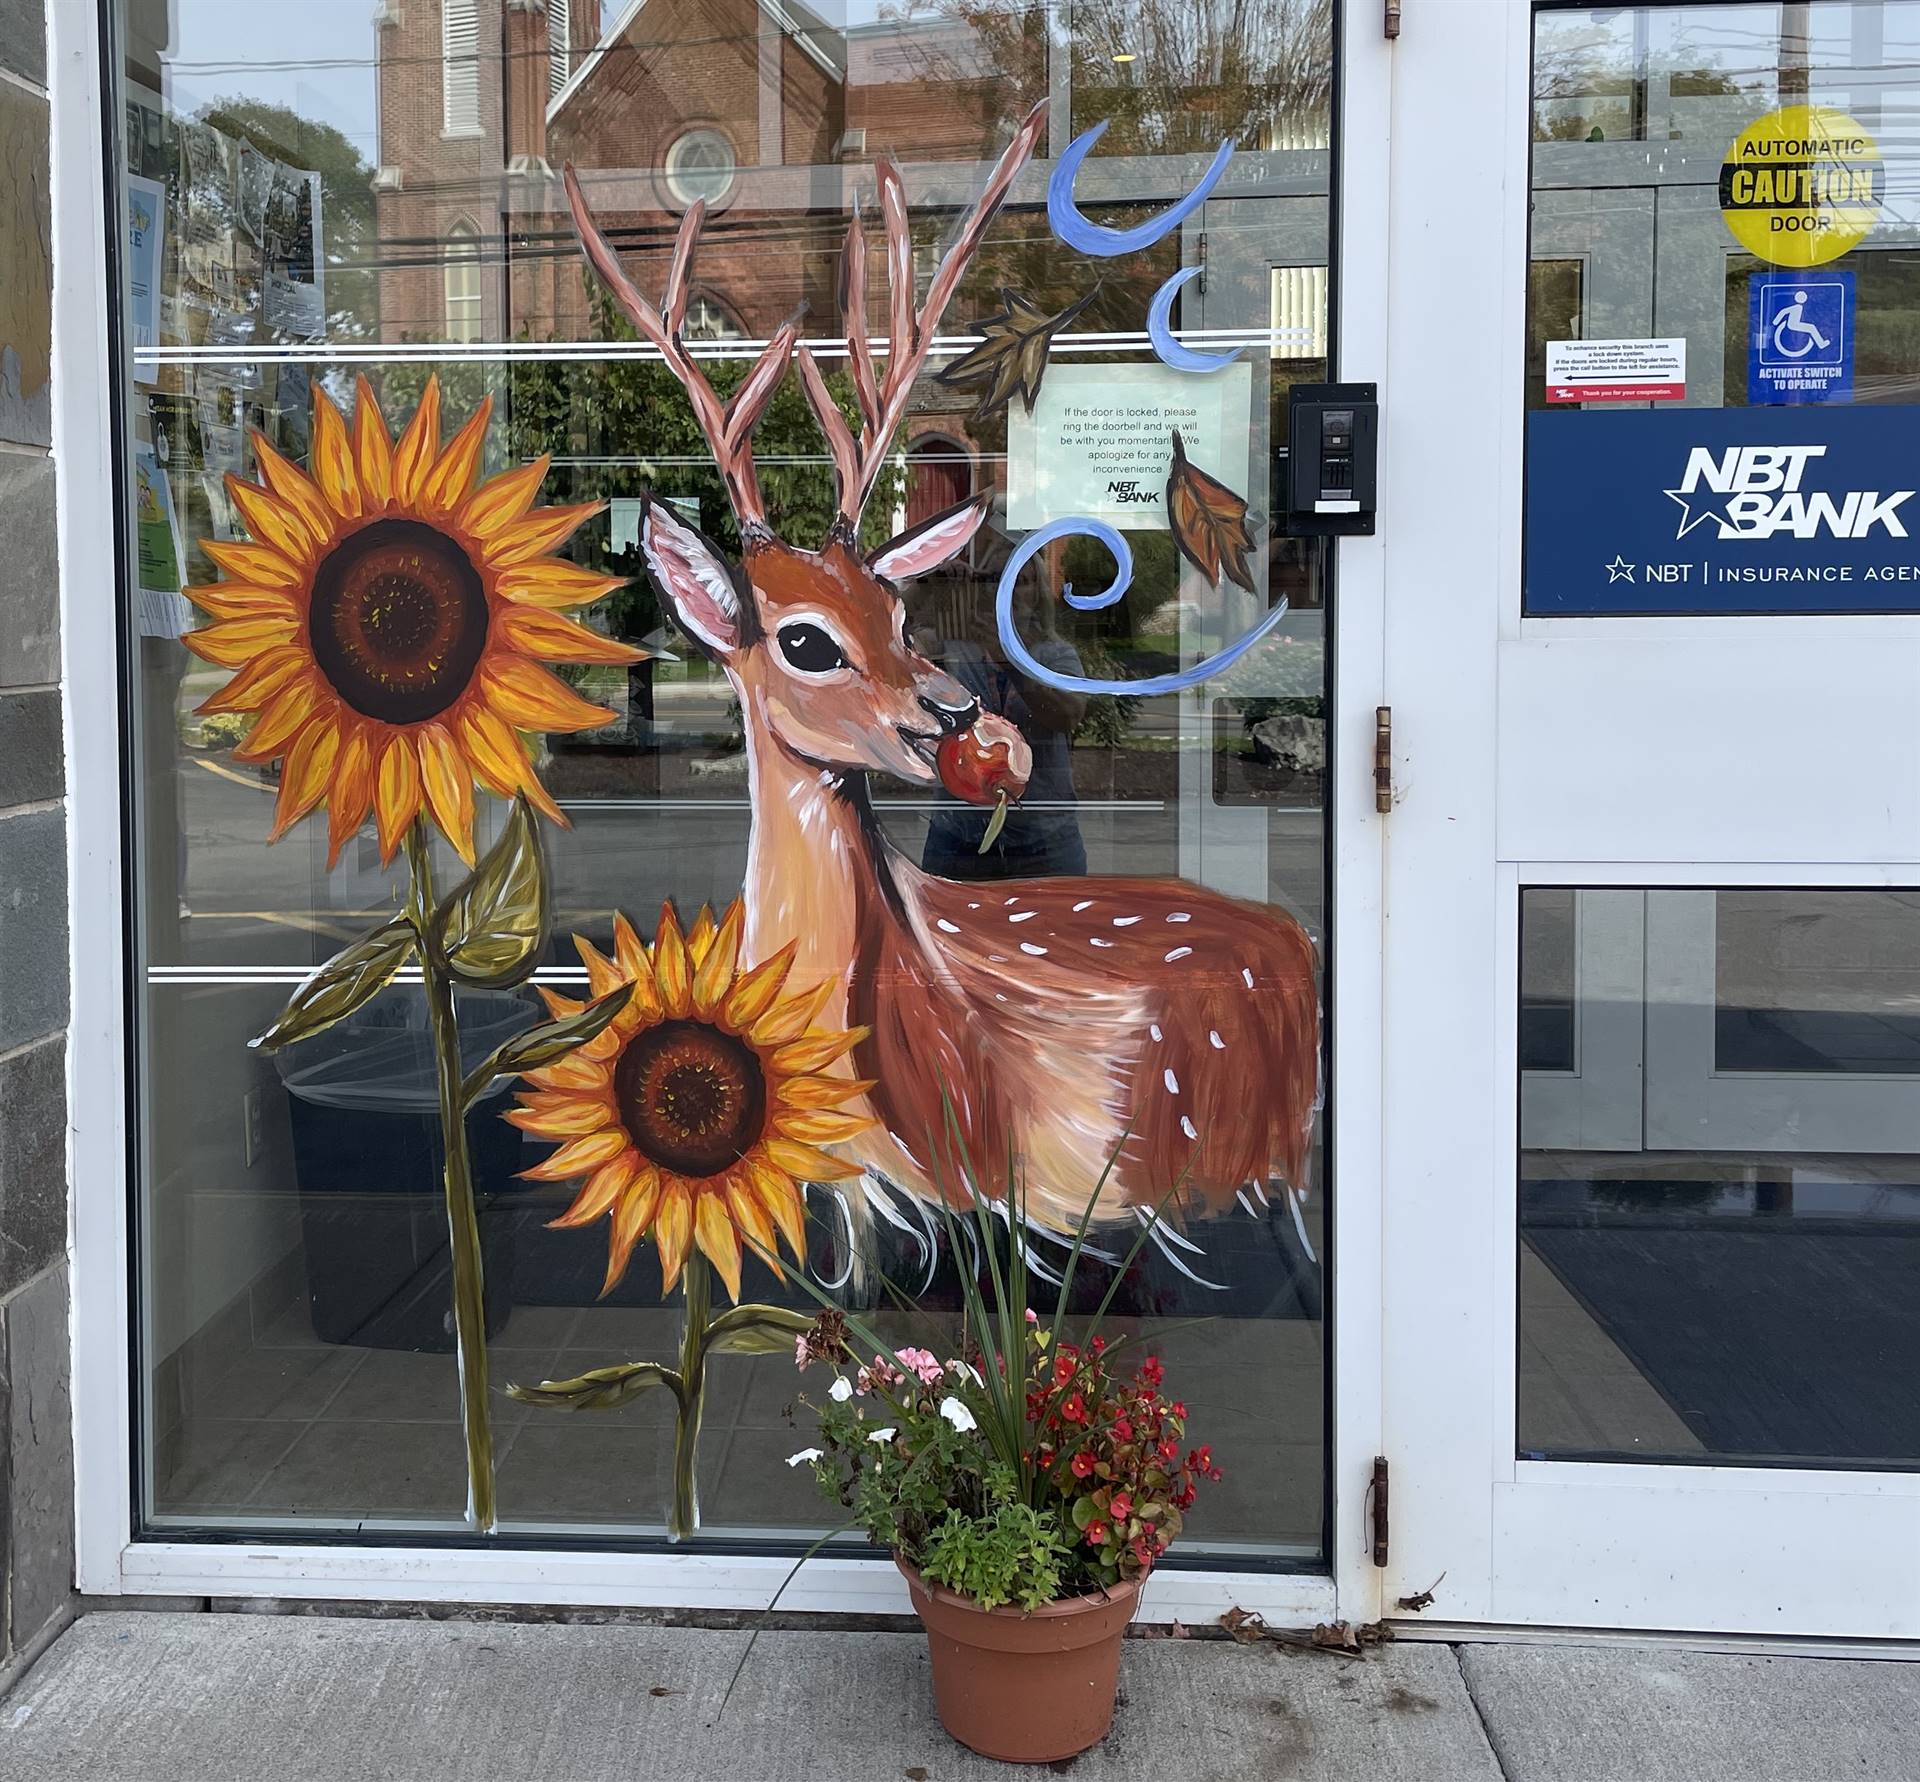 Art on downtown businesses